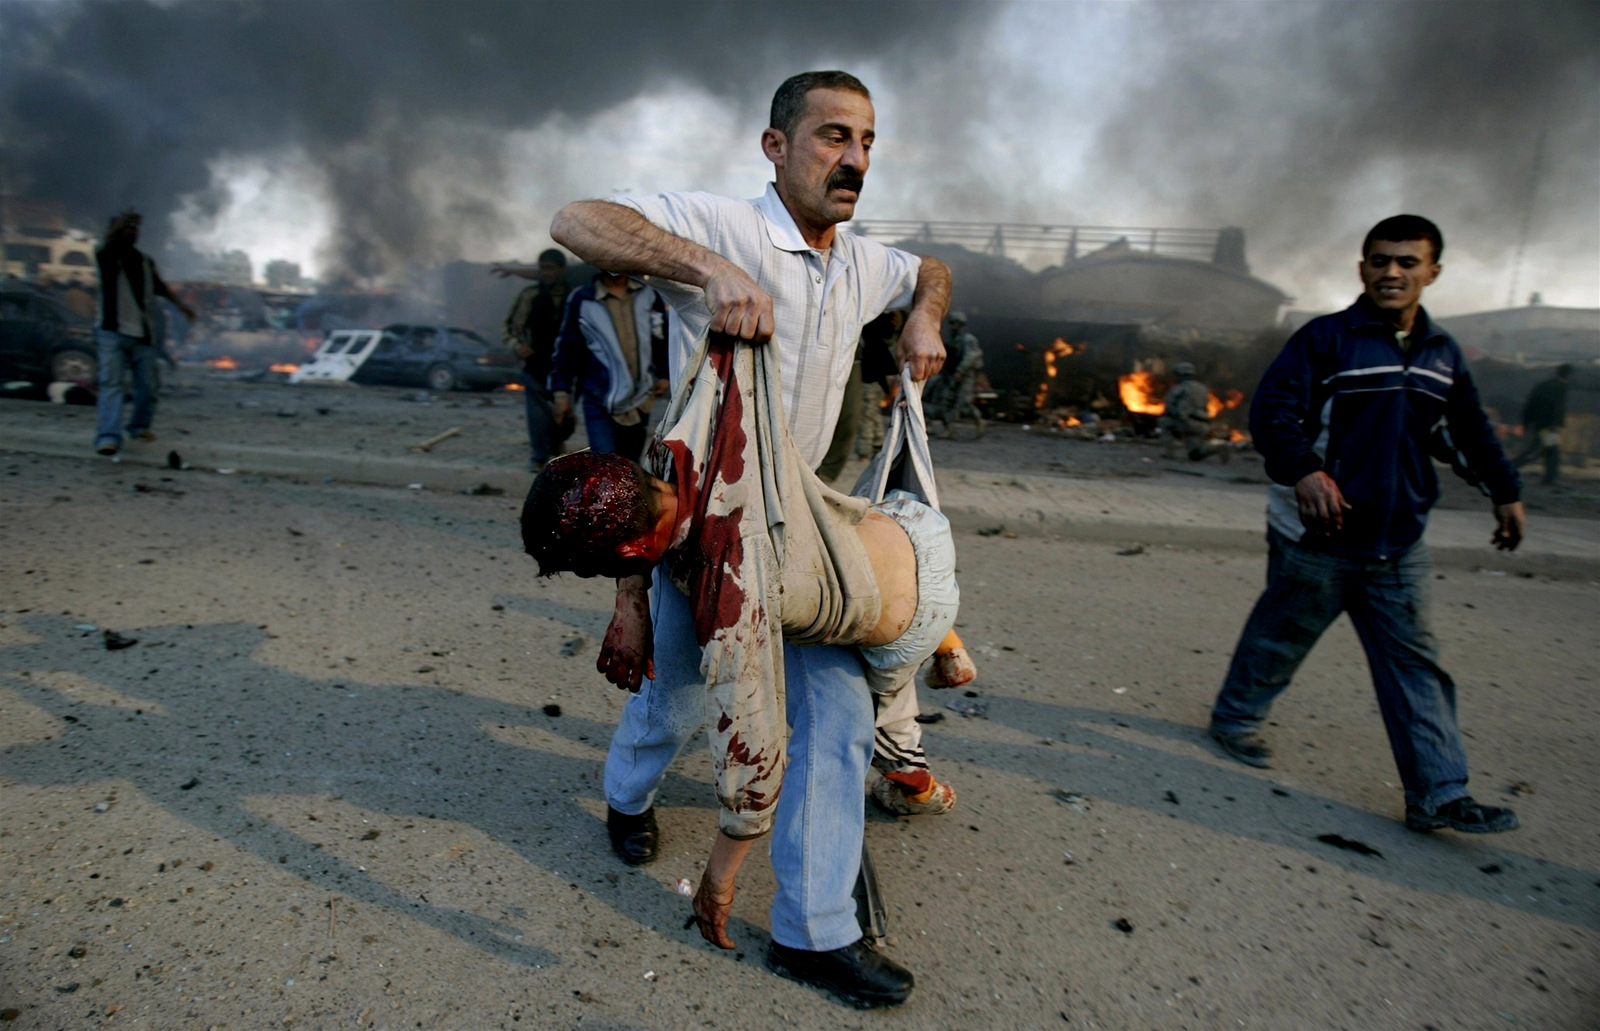 An Iraqi man holds the body of a boy after a car bomb explosion at a market in the neighborhood known as New Baghdad, southeast of Baghdad February 18, 2007. (Carlos Barria/Reuters) 